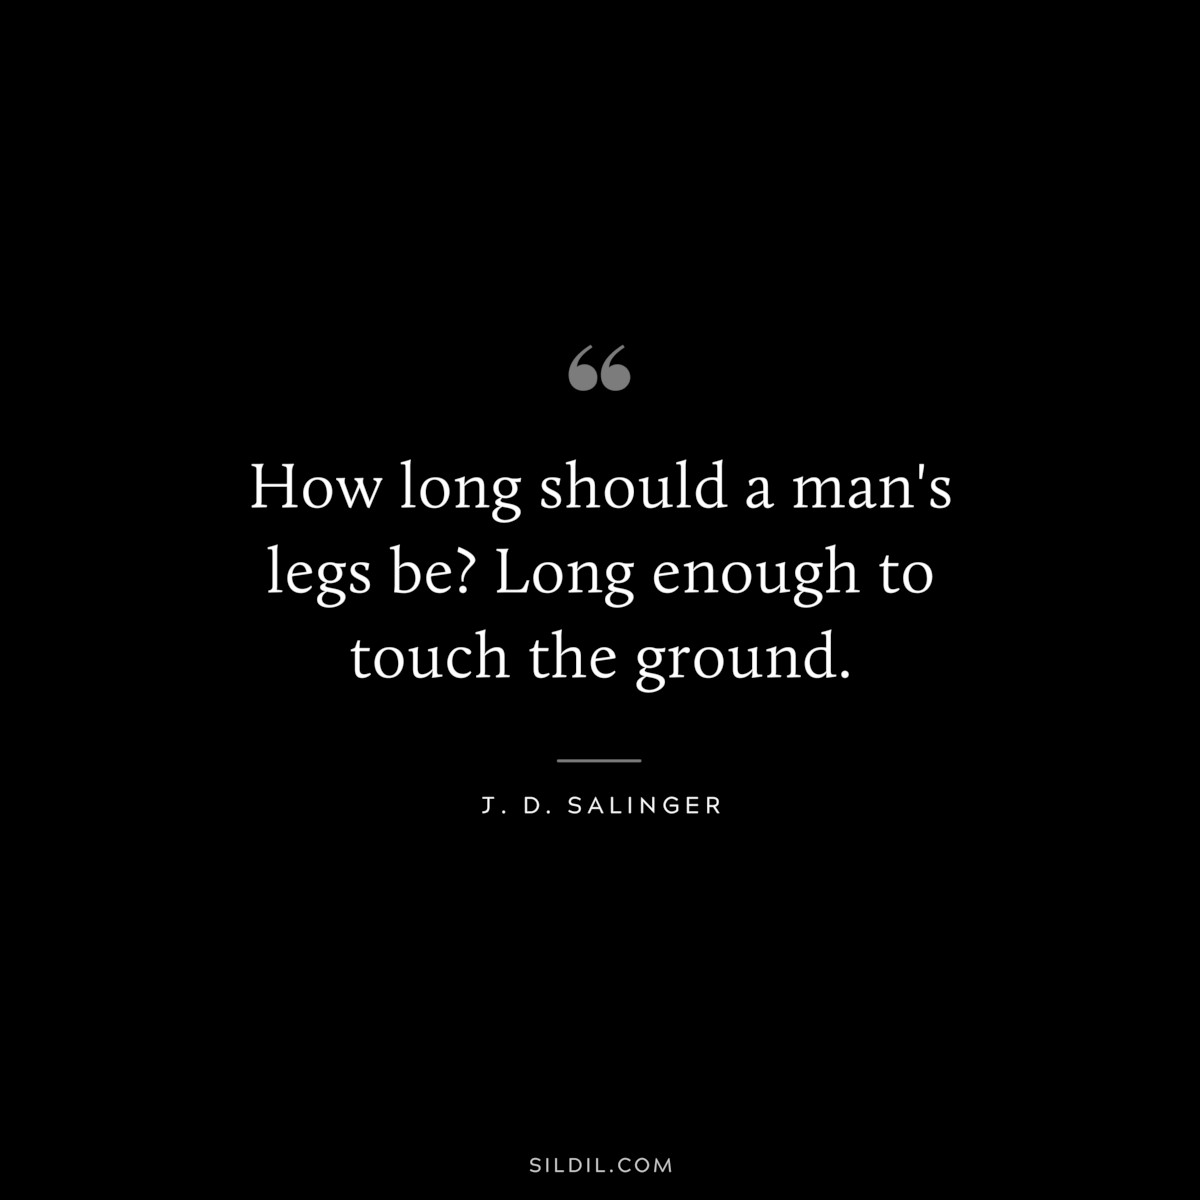 How long should a man's legs be? Long enough to touch the ground. — J. D. Salinger